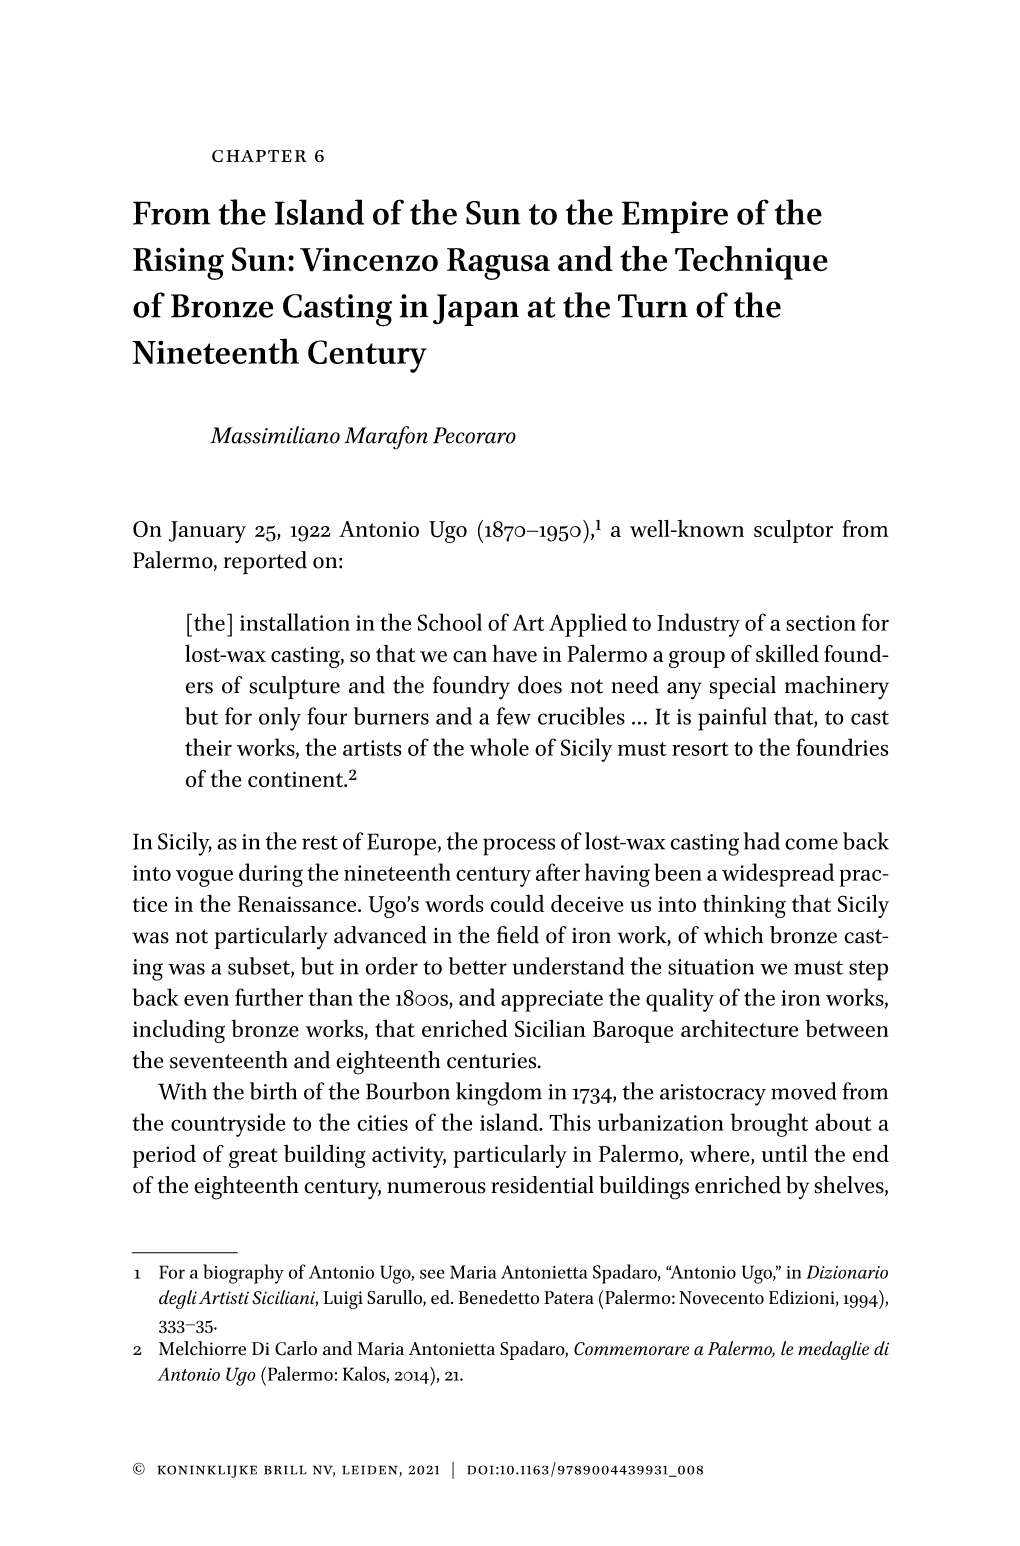 Vincenzo Ragusa and the Technique of Bronze Casting in Japan at the Turn of the Nineteenth Century